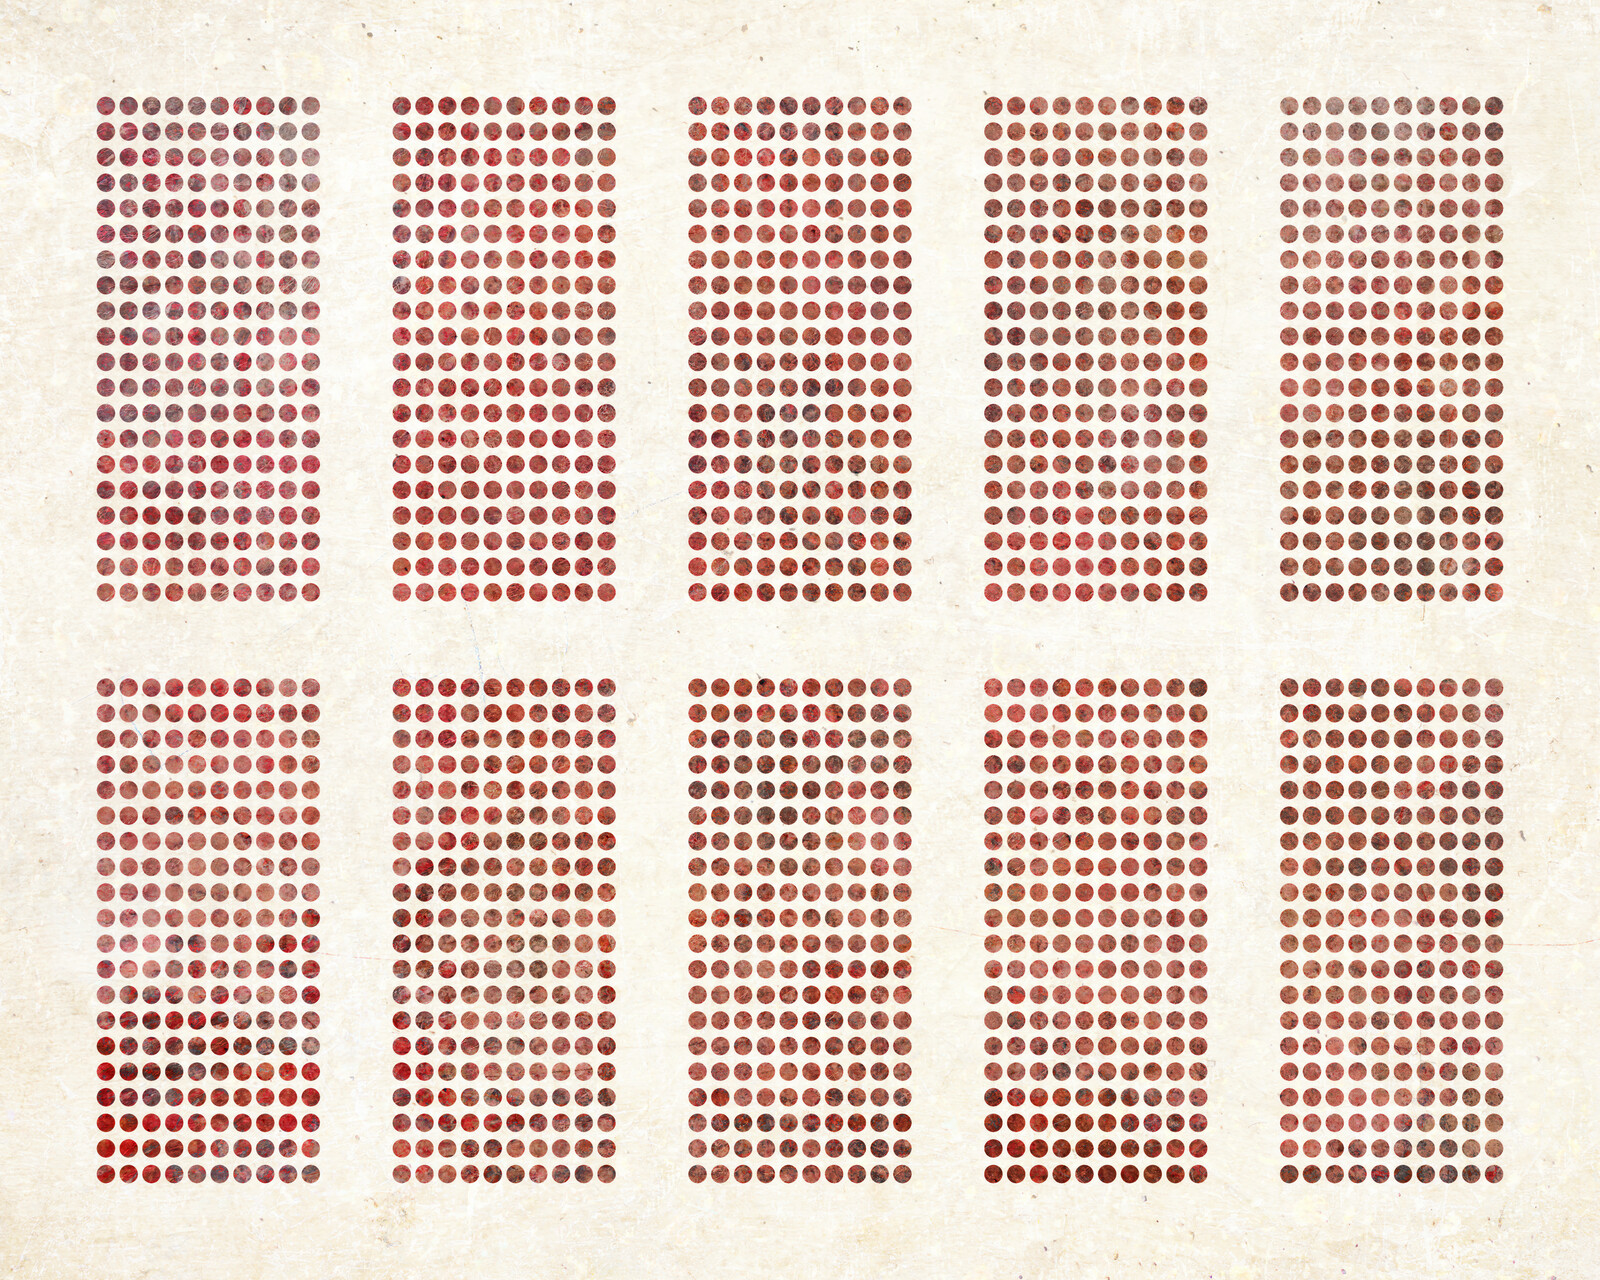 2,000 small red circles, in rectangular groups of 200s.